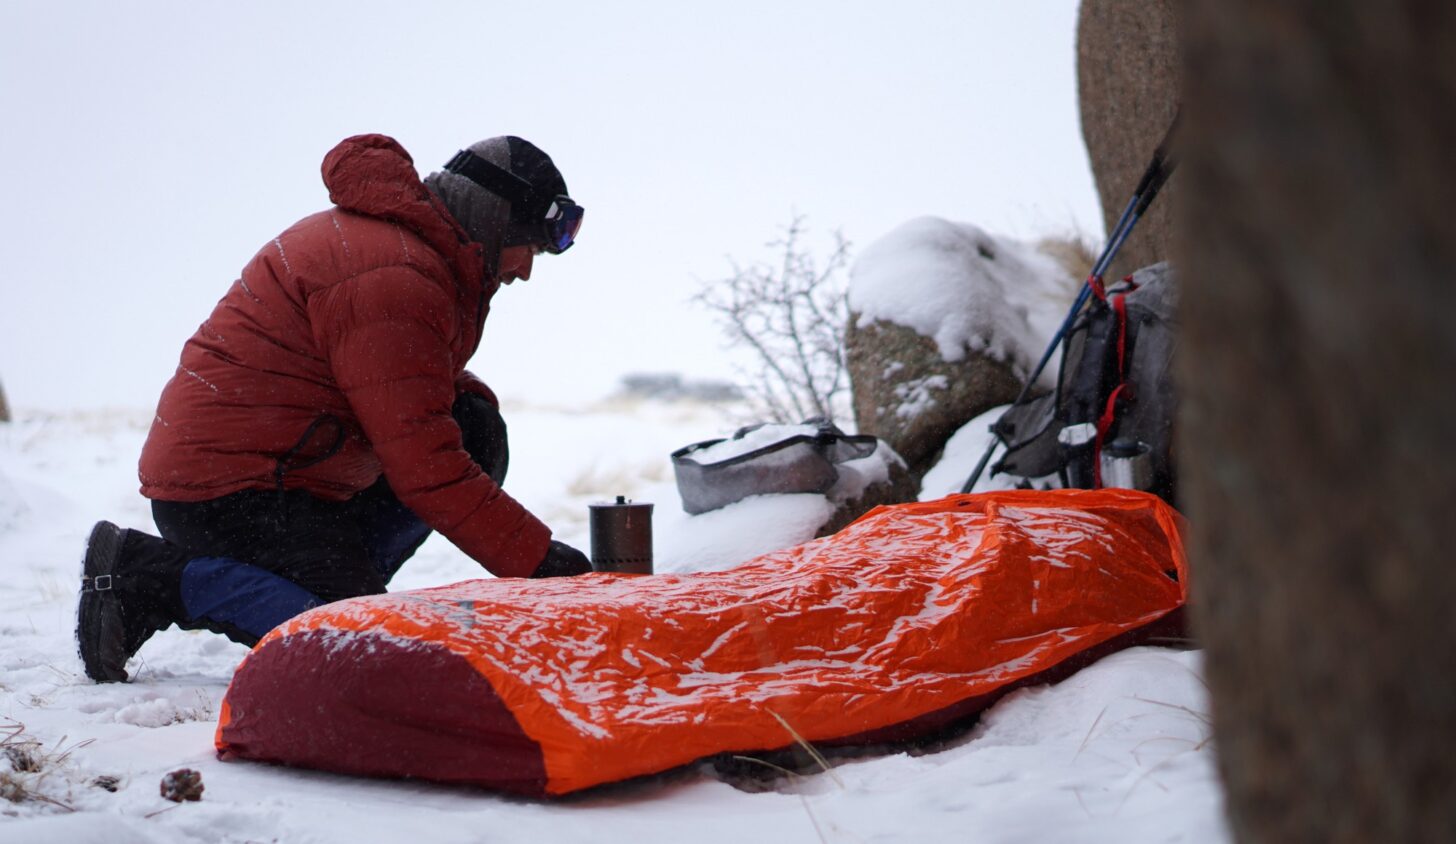 man operating a backpacking stove near his bivy sack in a snowy winter camp